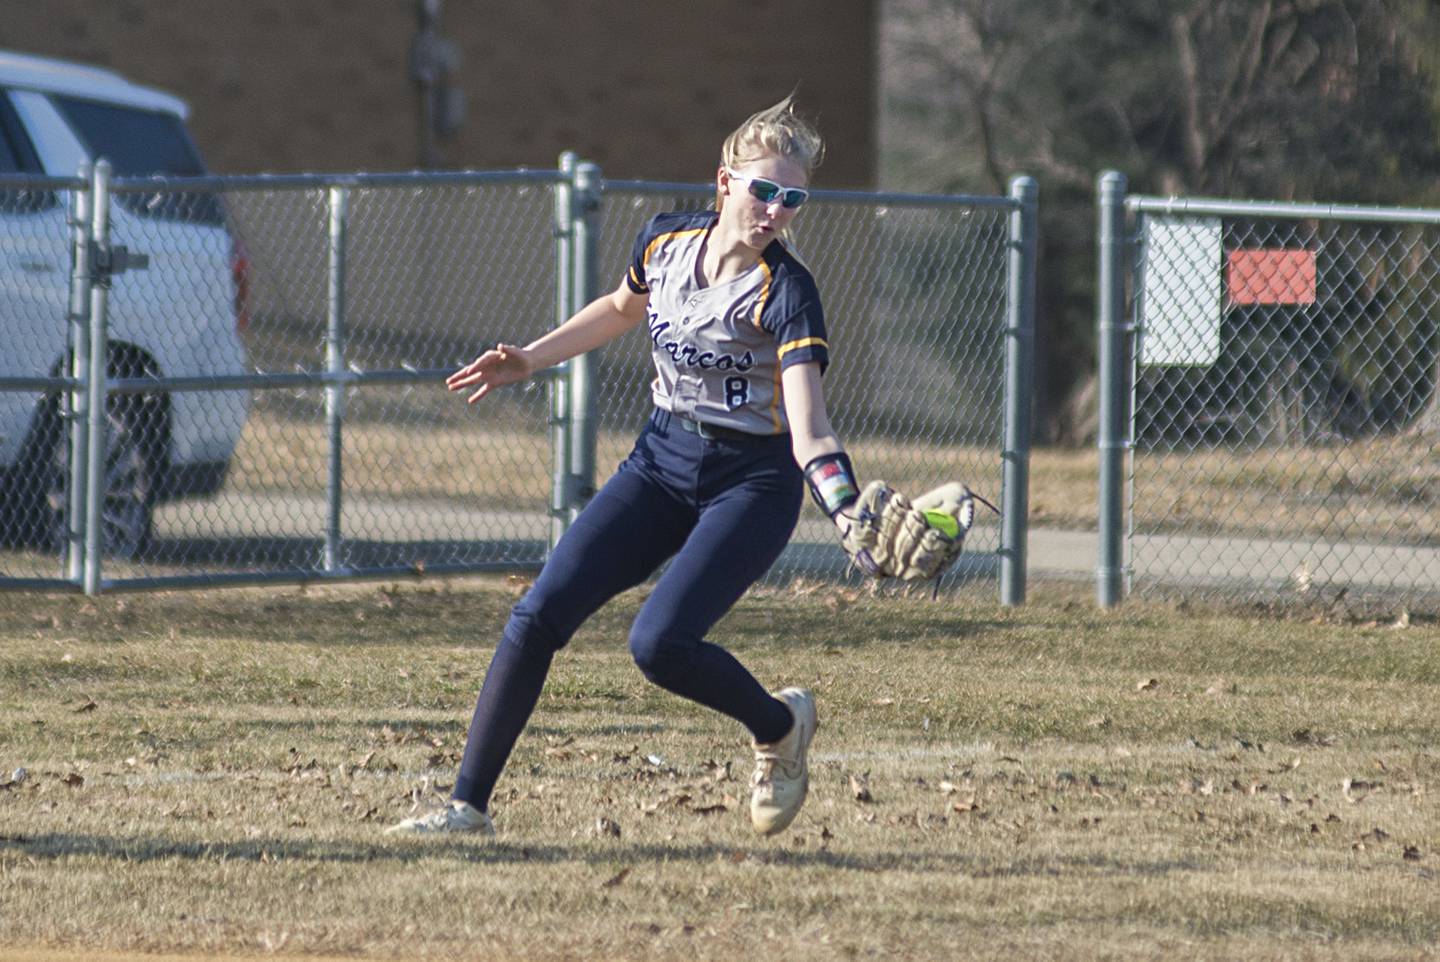 Polo's left fielder Sydnei Rahn catches a fly ball in the first inning on Tuesday, March 15, 2022 against Newman.